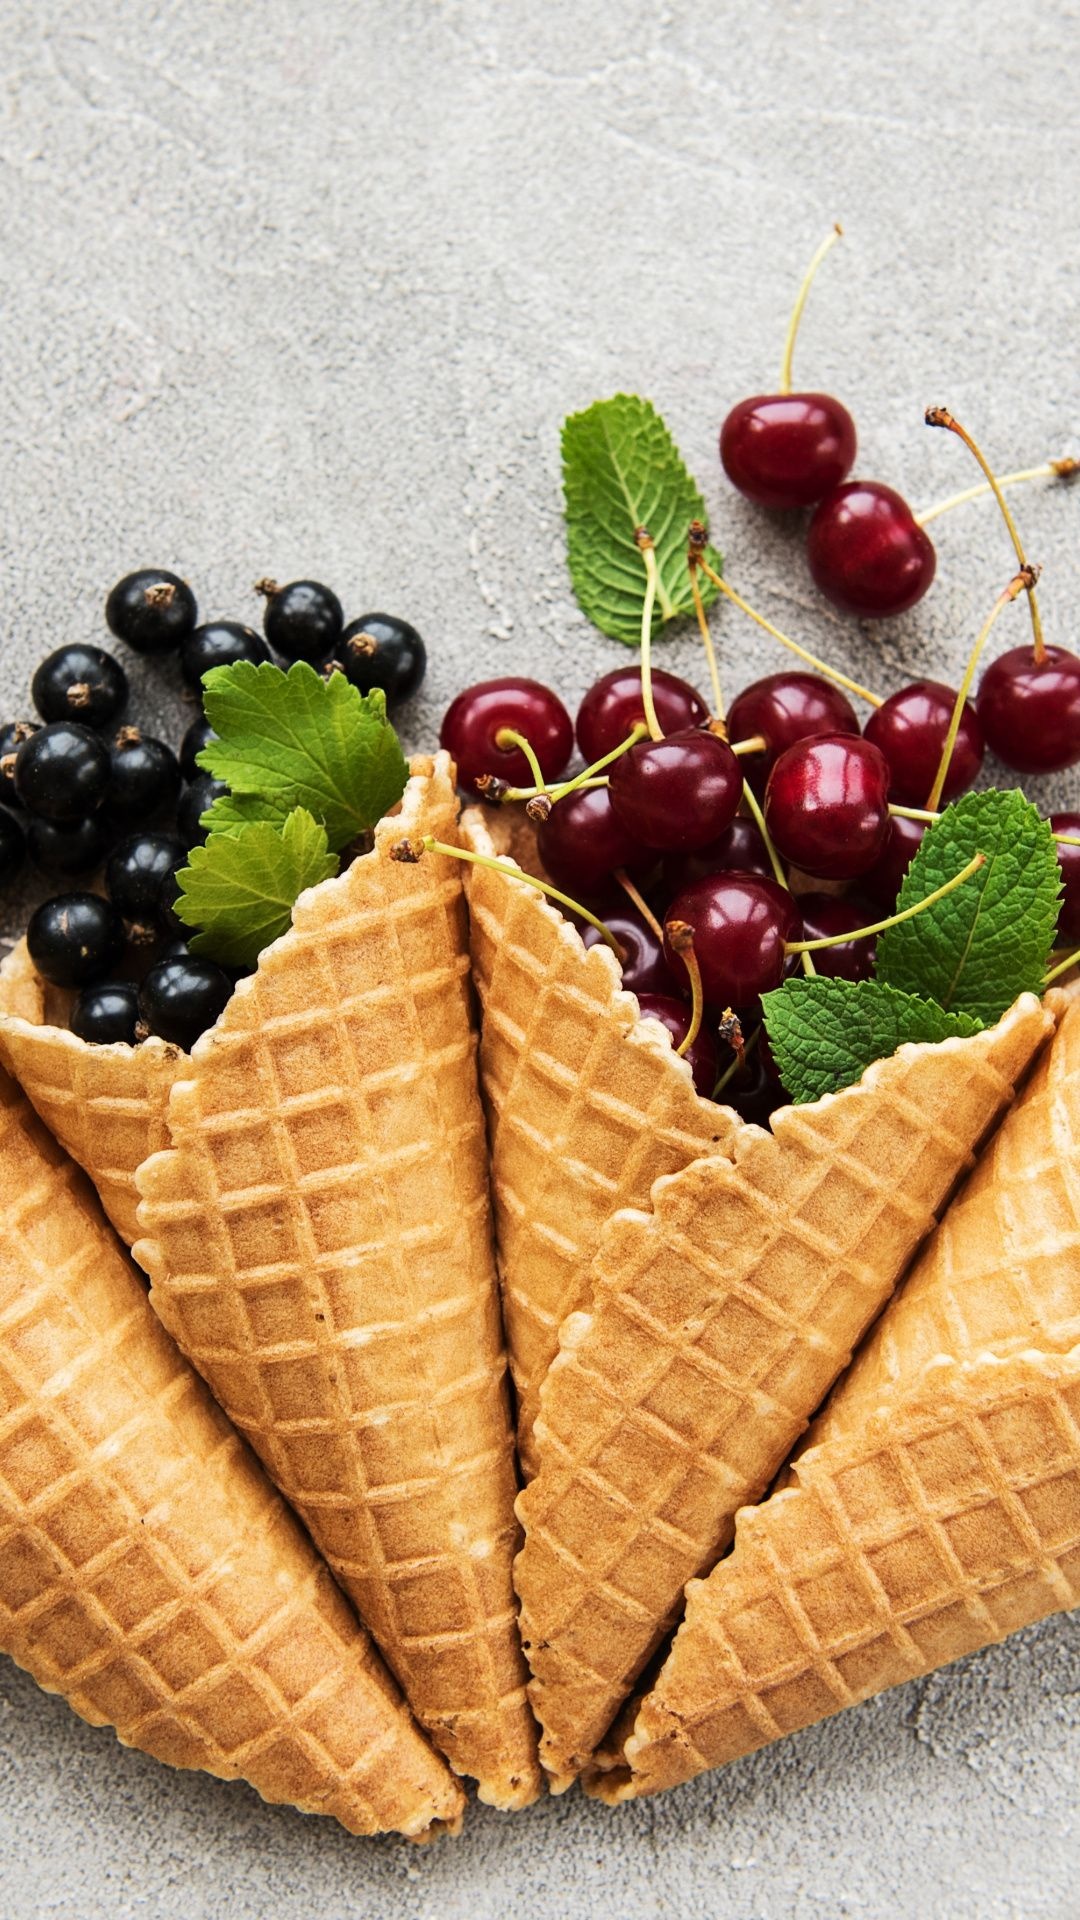 Waffle: Golden-brown ice cream cone, Fruits, Berries. 1080x1920 Full HD Wallpaper.